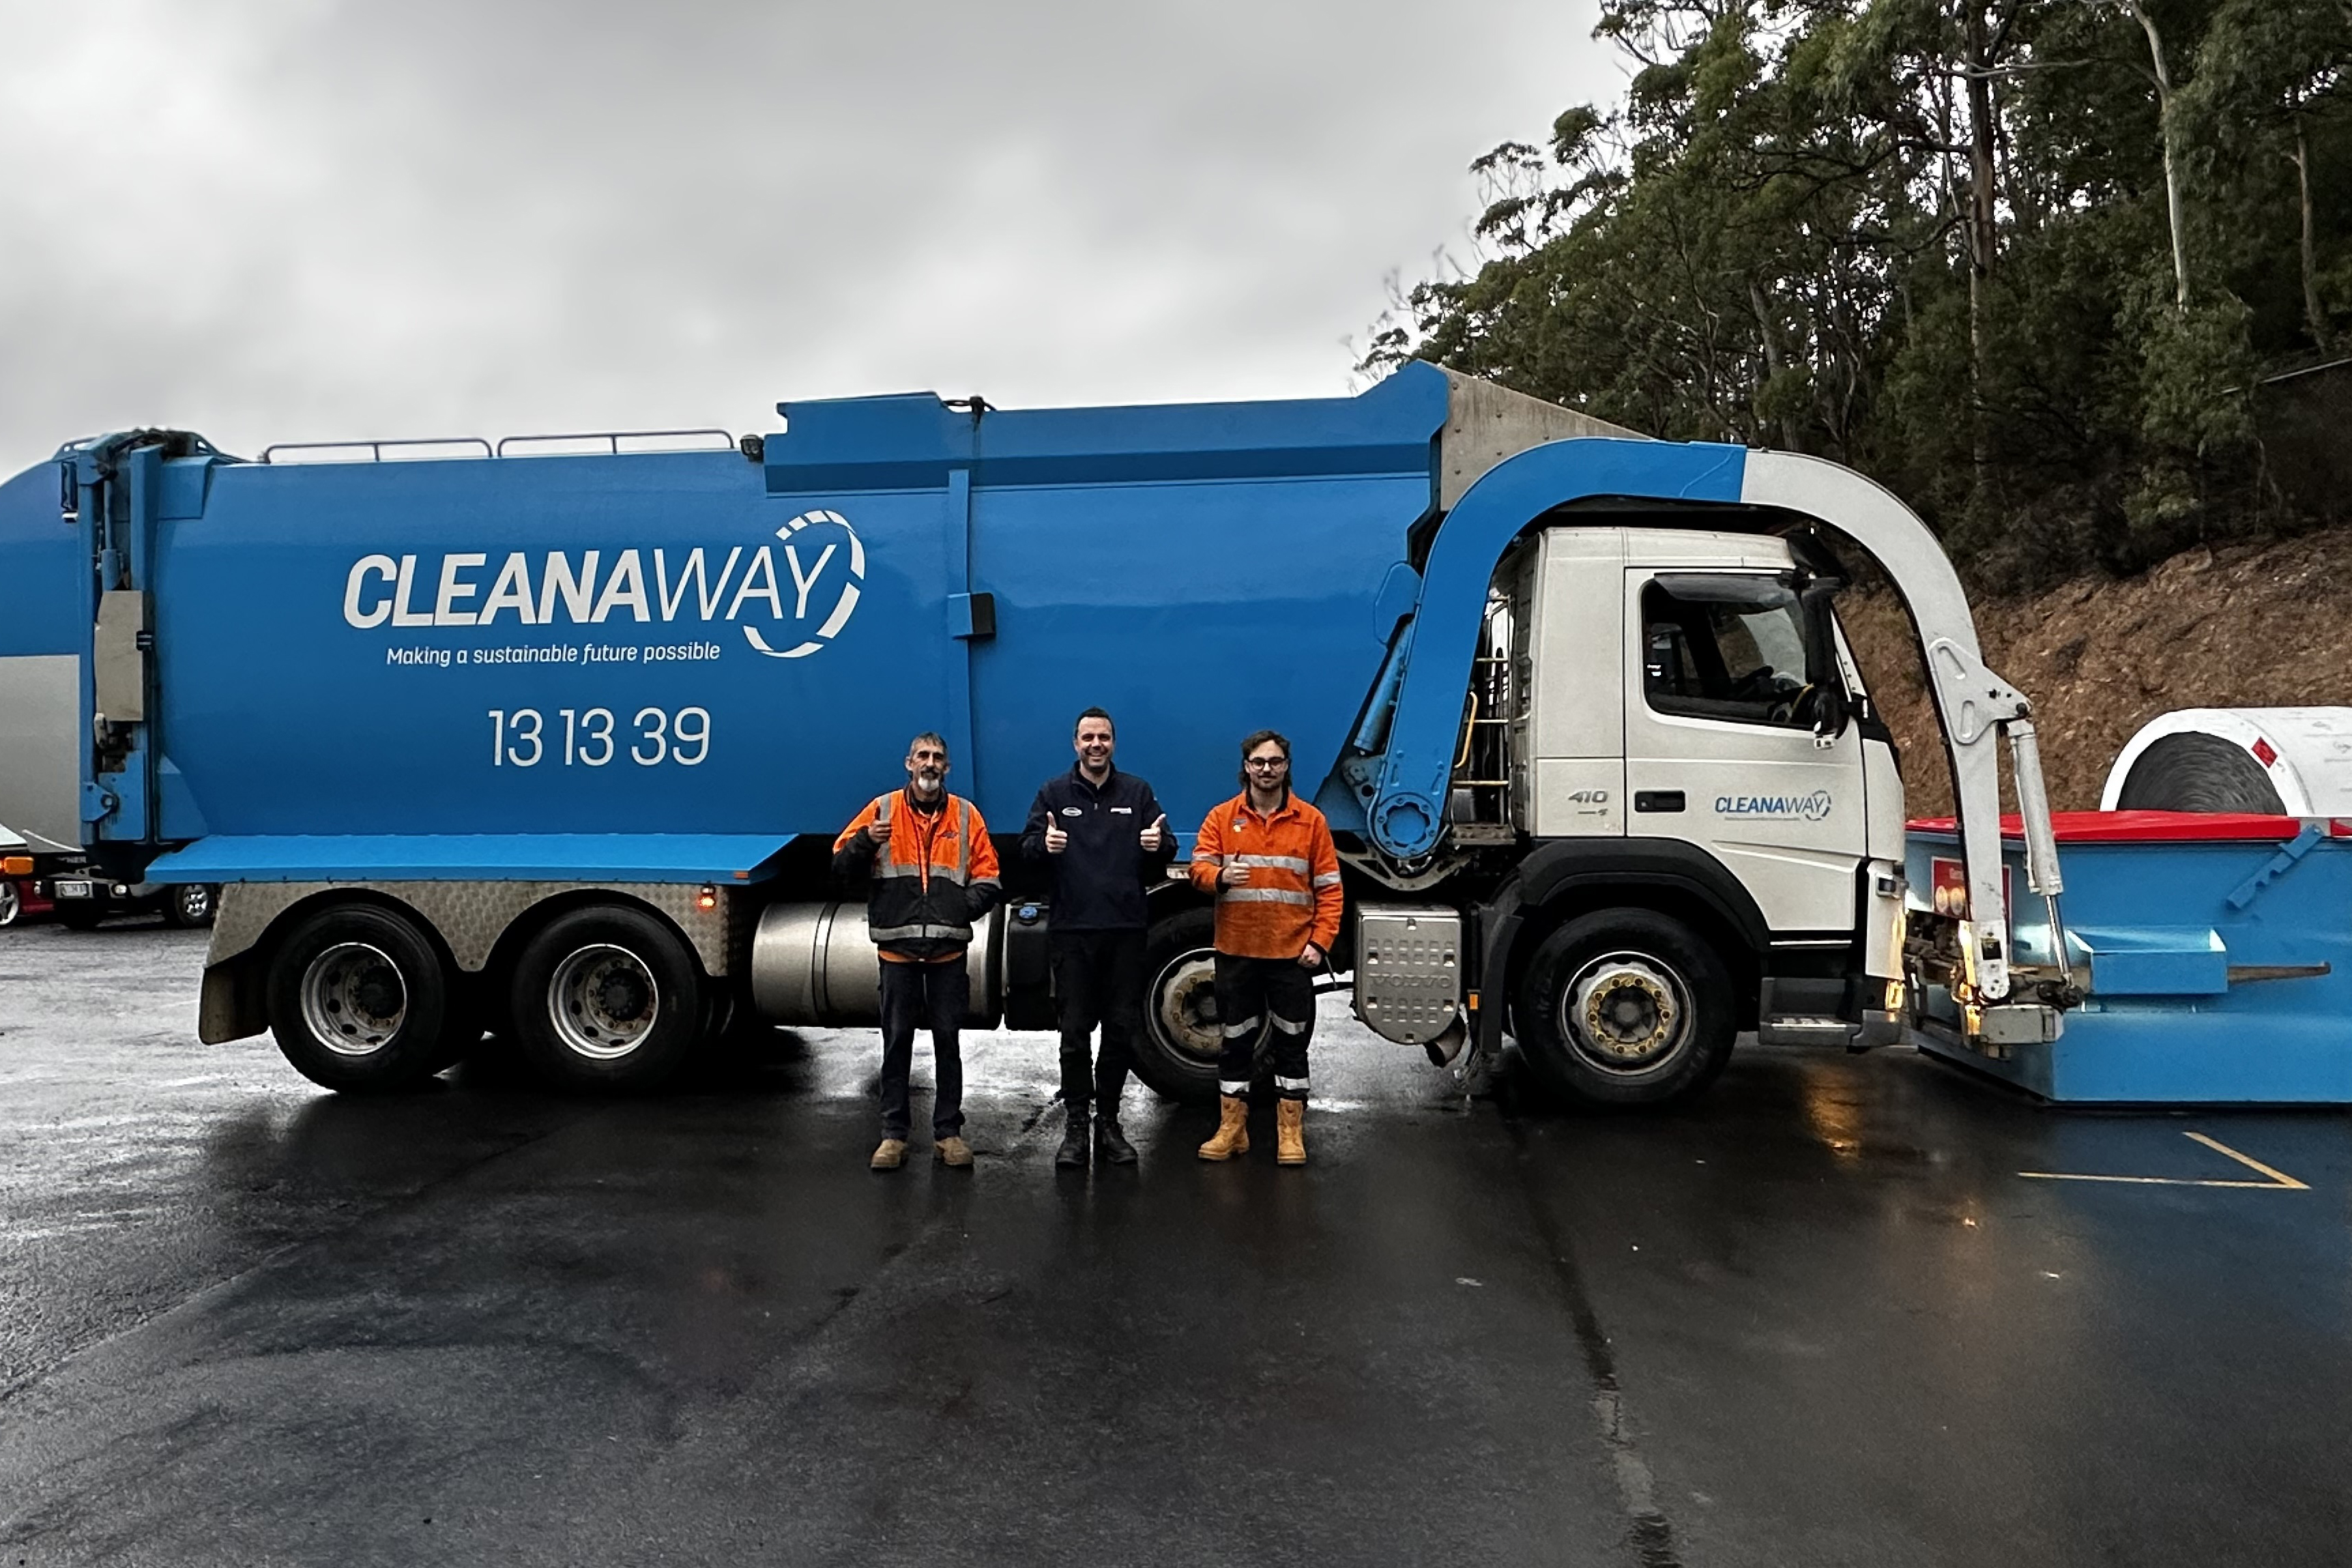 Statewide Belting Trash Waste Inefficiencies and Align with Cleanaway